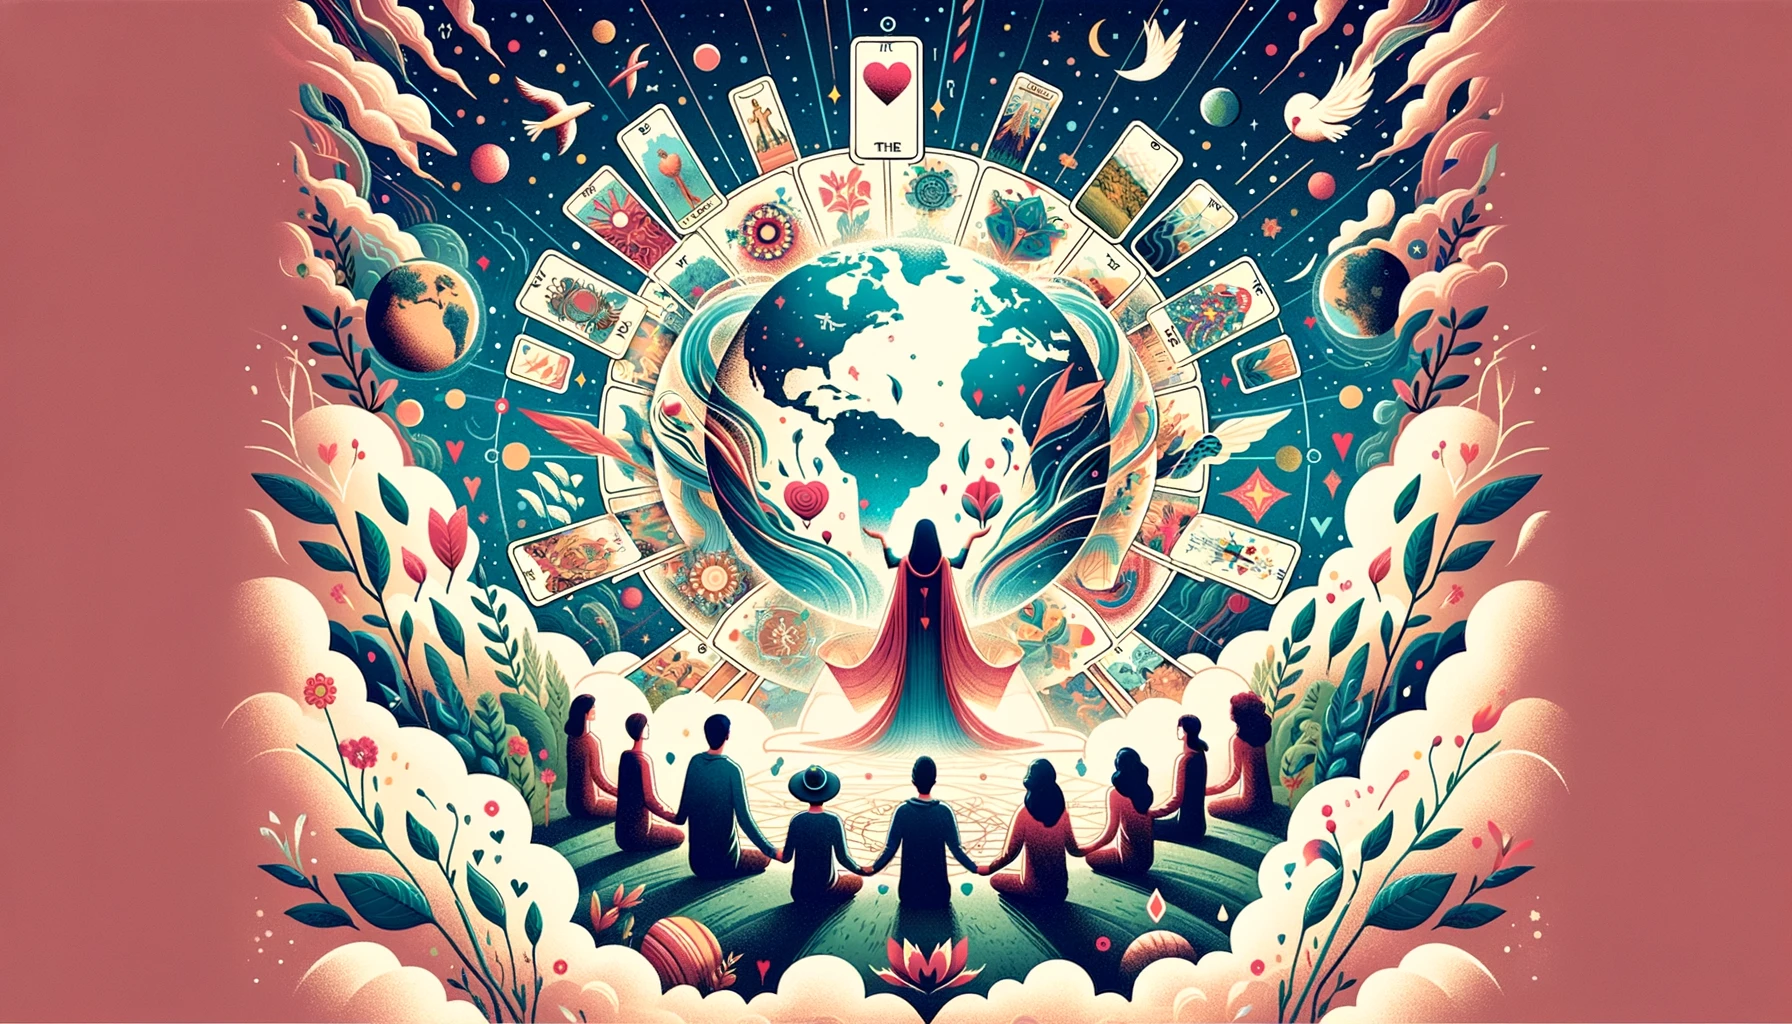 "An illustration symbolizing fulfillment, unity, and a sense of belonging with 'The World' Tarot card. Depicts a joyful, accomplished individual surrounded by cosmic symbols, representing completion, unity, and emotional fulfillment."